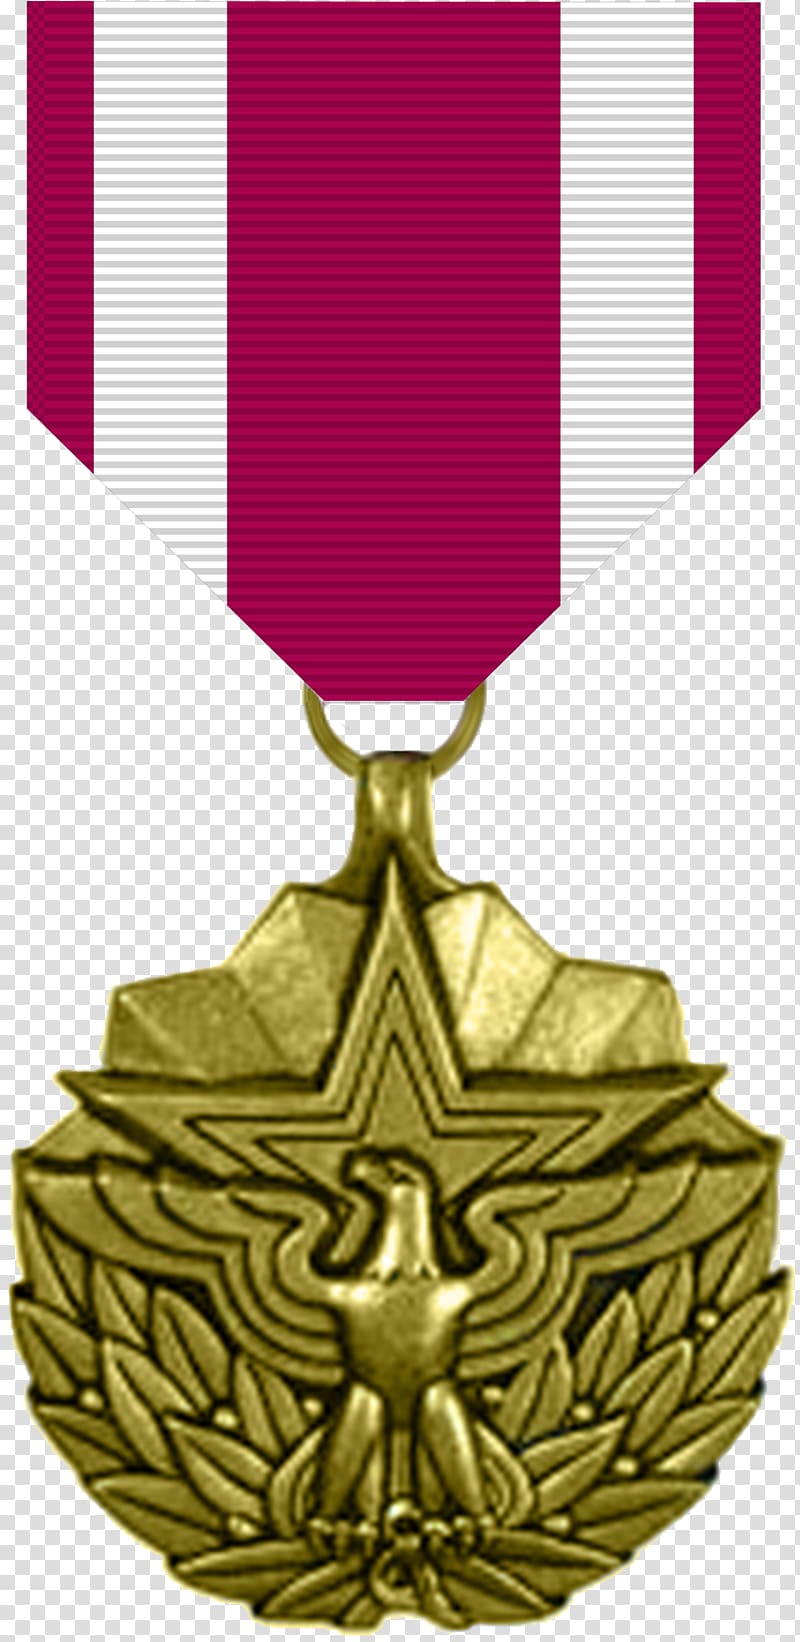 Meritorious Service Medal Military awards and decorations National Defense Service Medal, medal transparent background PNG clipart